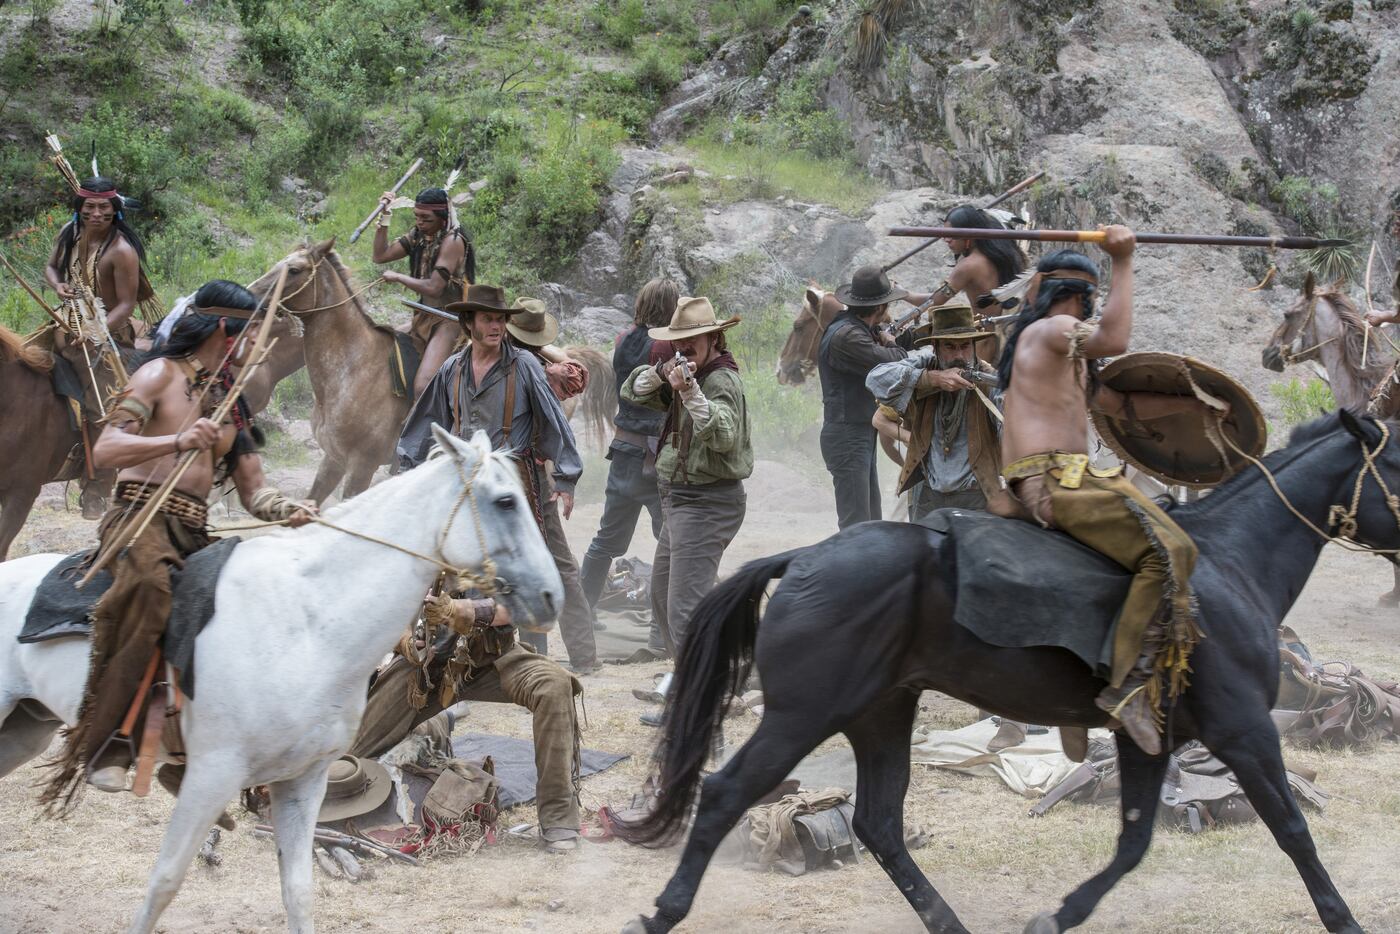 "Texas Rising" premieres May 25 on the History Channel.